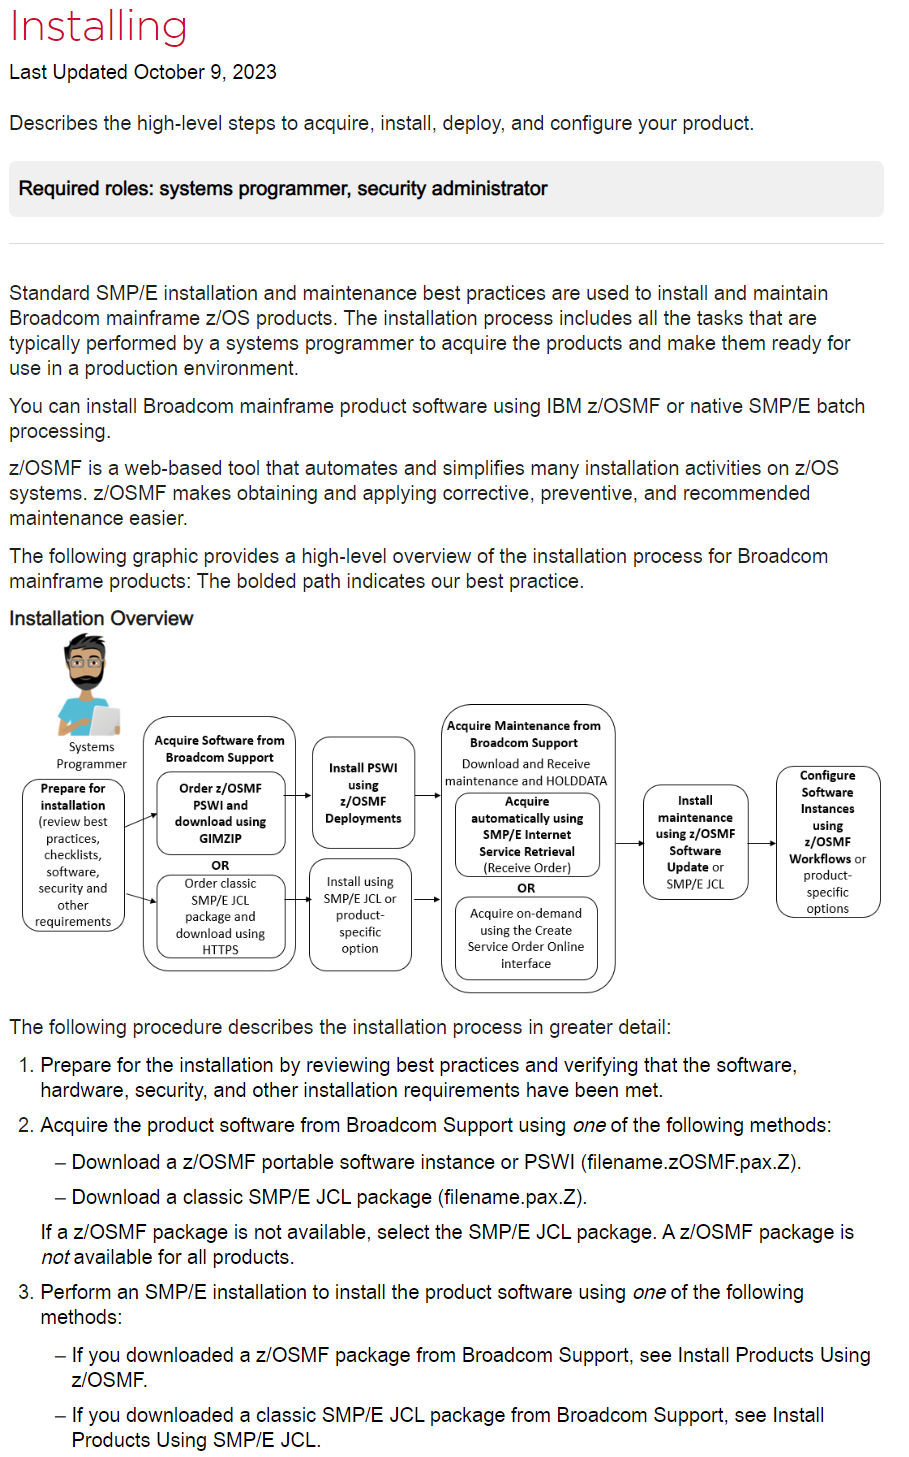 Several paragraphs introducing the process to install mainframe software followed by a bubble diagram highlighting each step and an avatar to identify the system programmer as the primary audience.